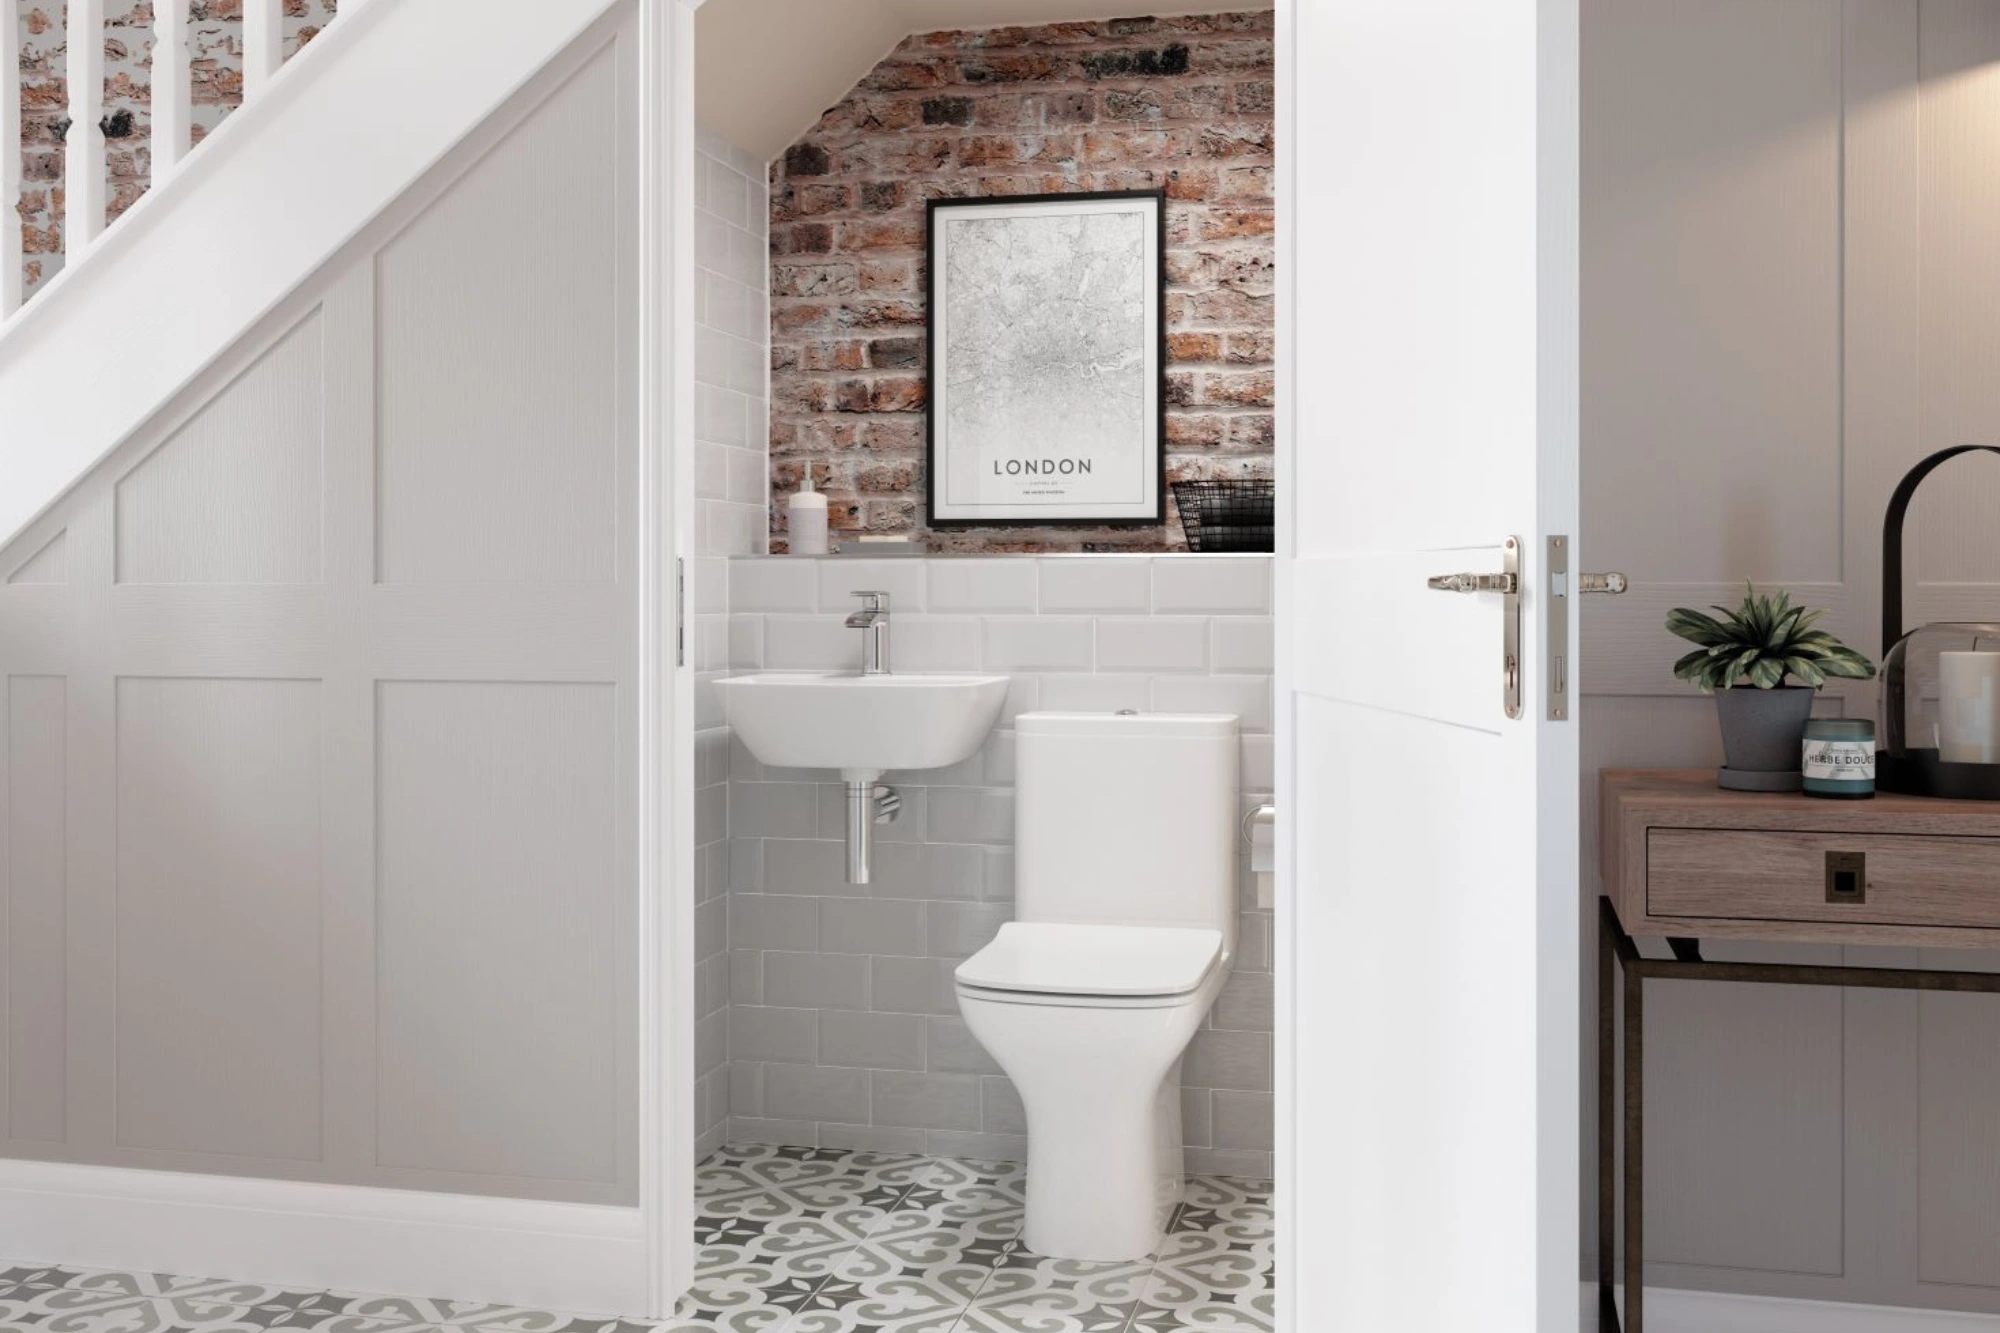 Space-Saving Hacks for Small Bathrooms